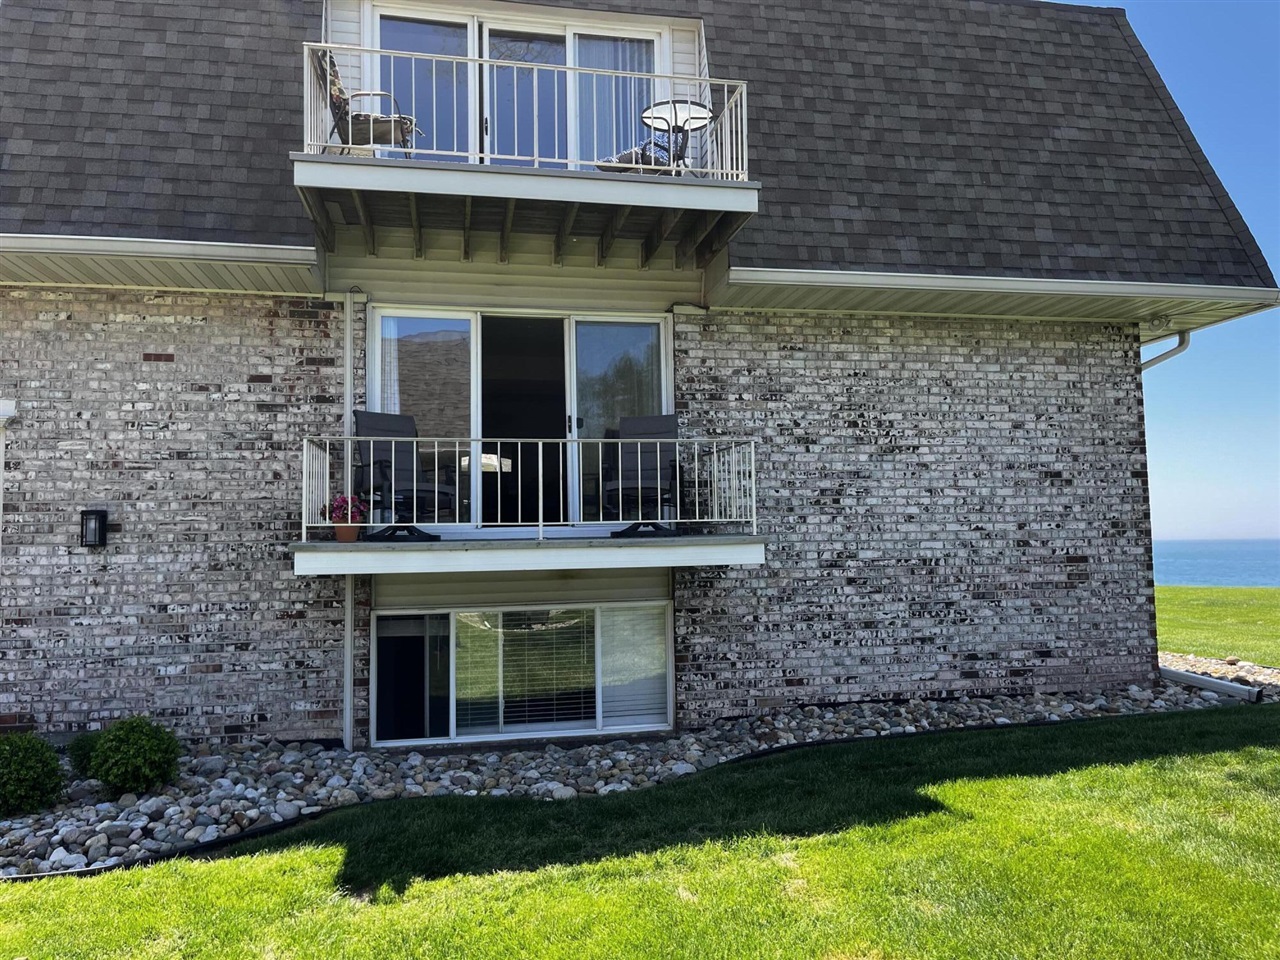 Your next vacation spot! Enjoy Lake Michigan views, lake access, and two on-site pools. Multiple community grills and tables on the bluff overlooking Lake Michigan.